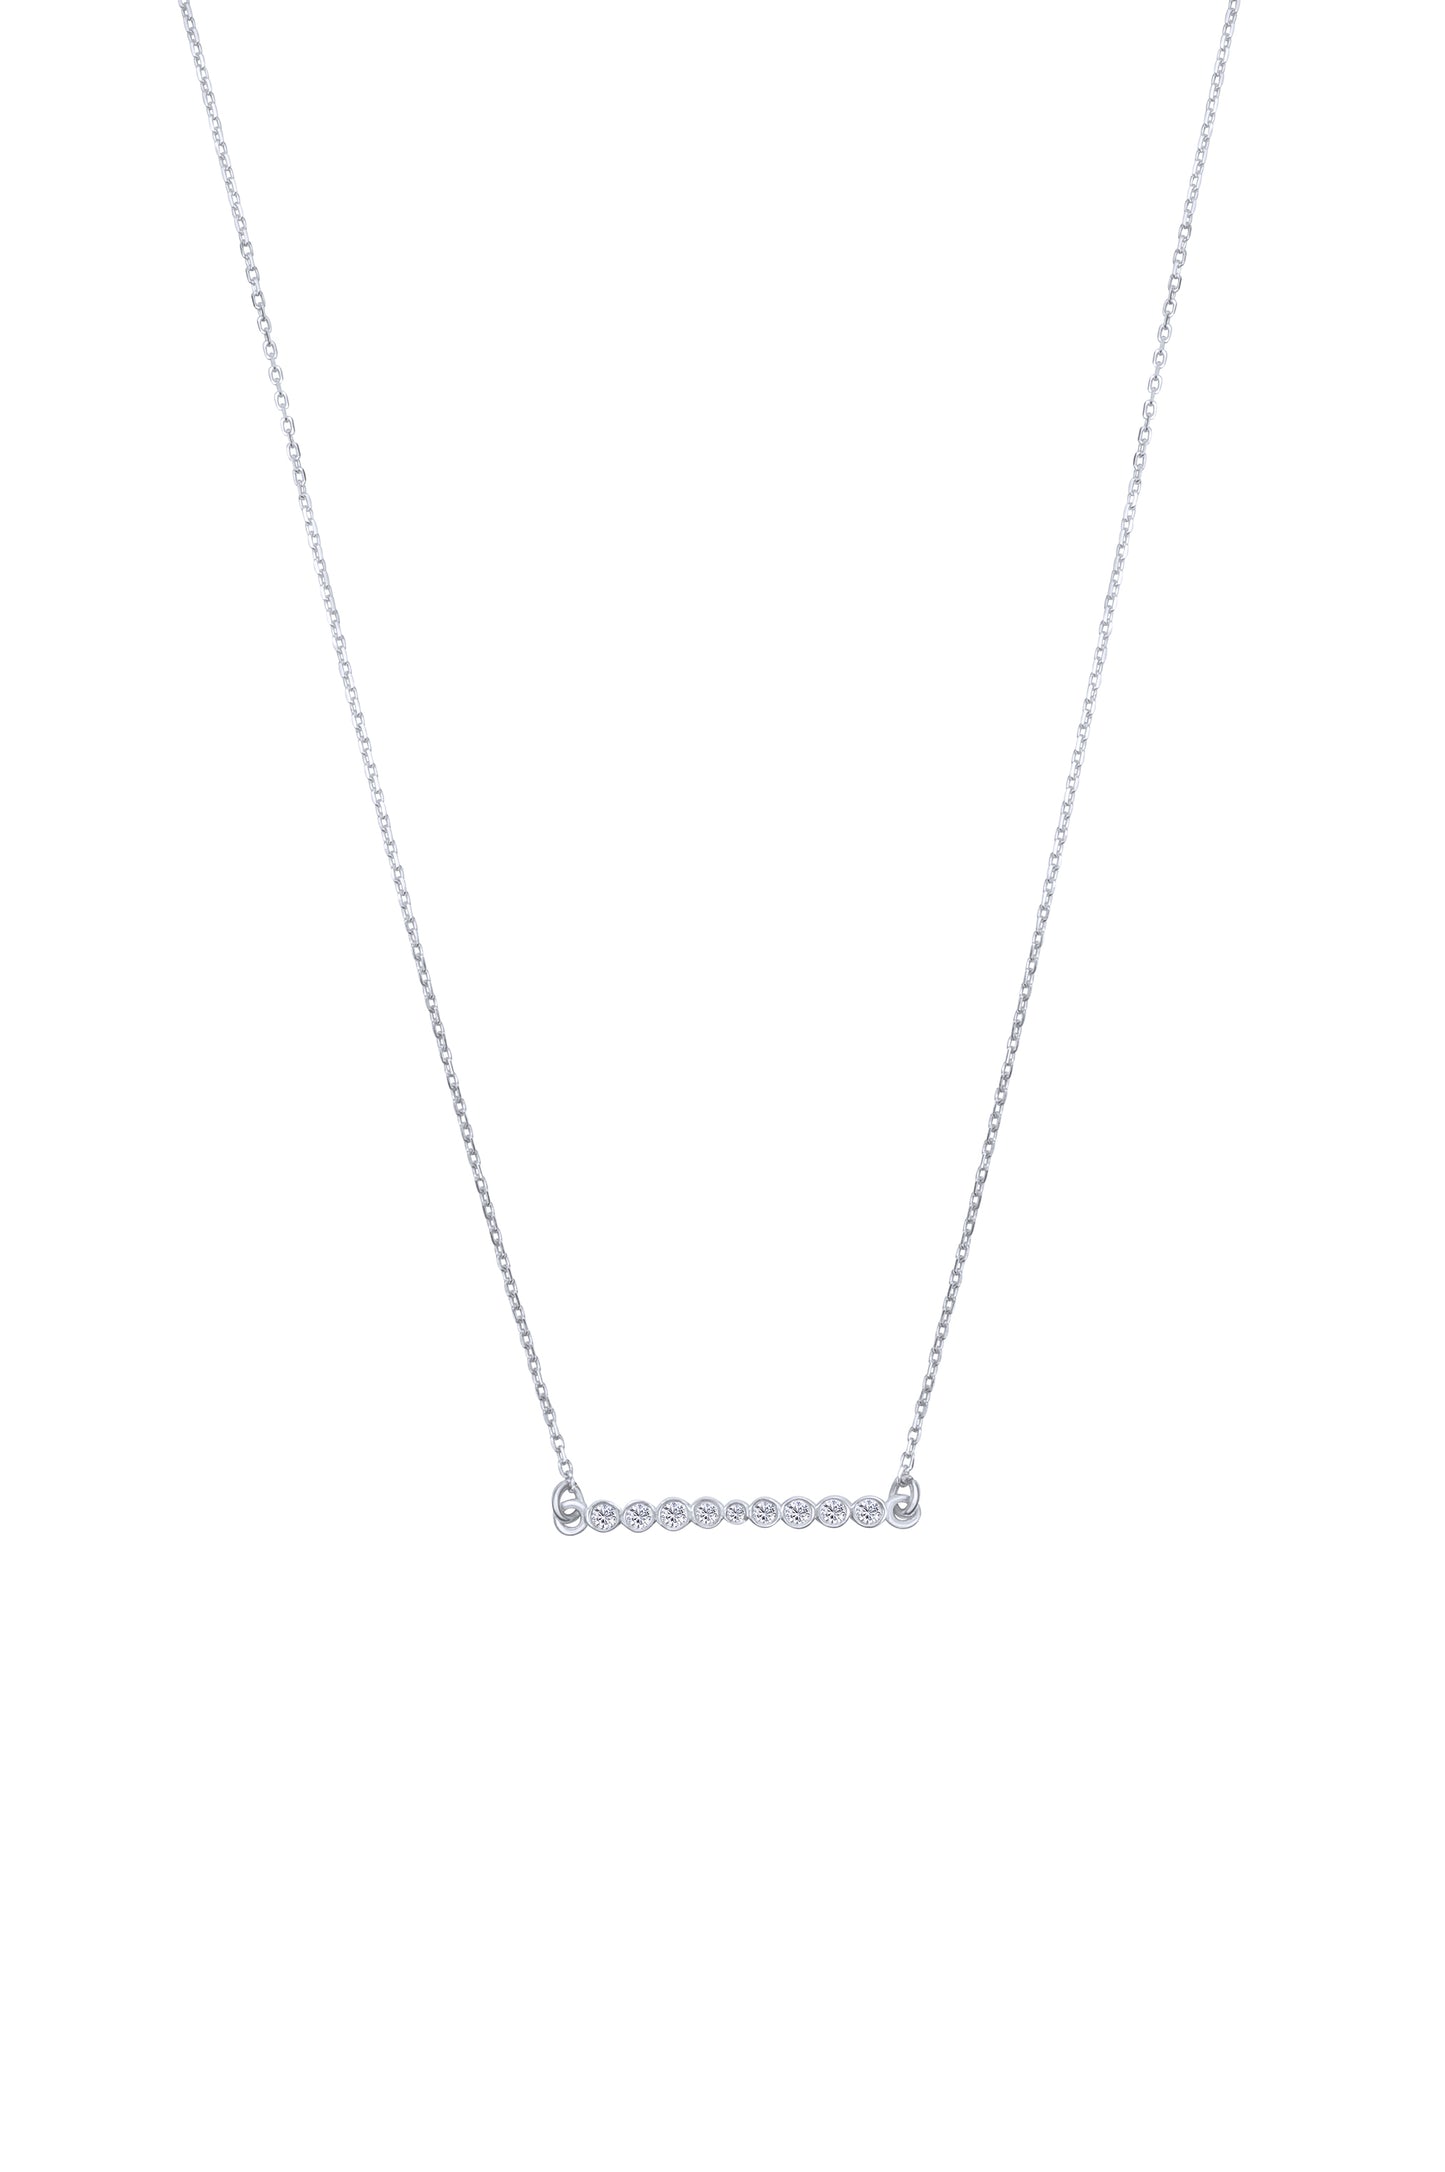 Bubble Line Necklace - Silver Rhodium Plated